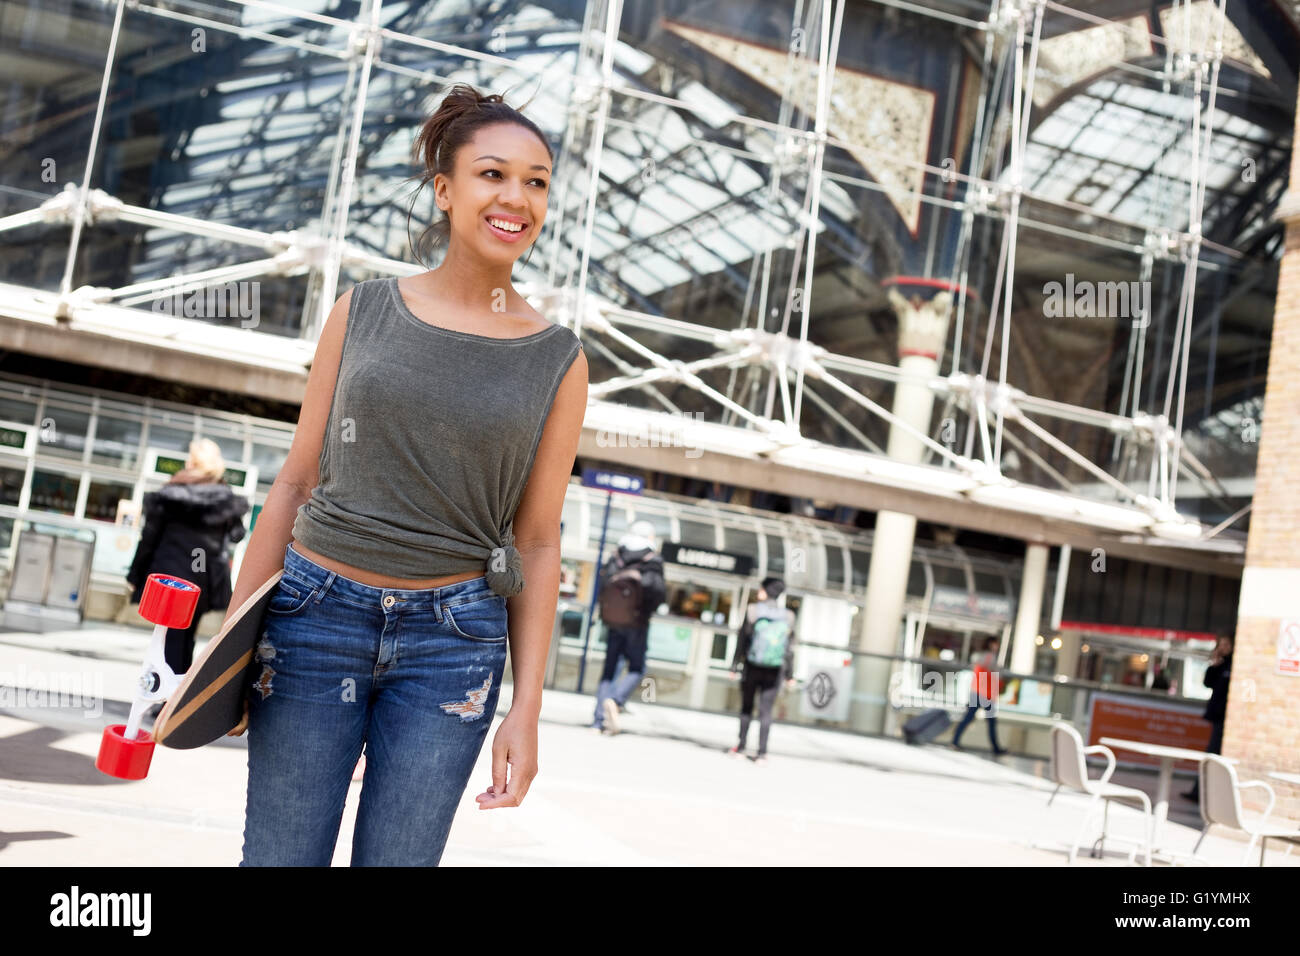 A happy young woman holding a skateboard in the city. Stock Photo